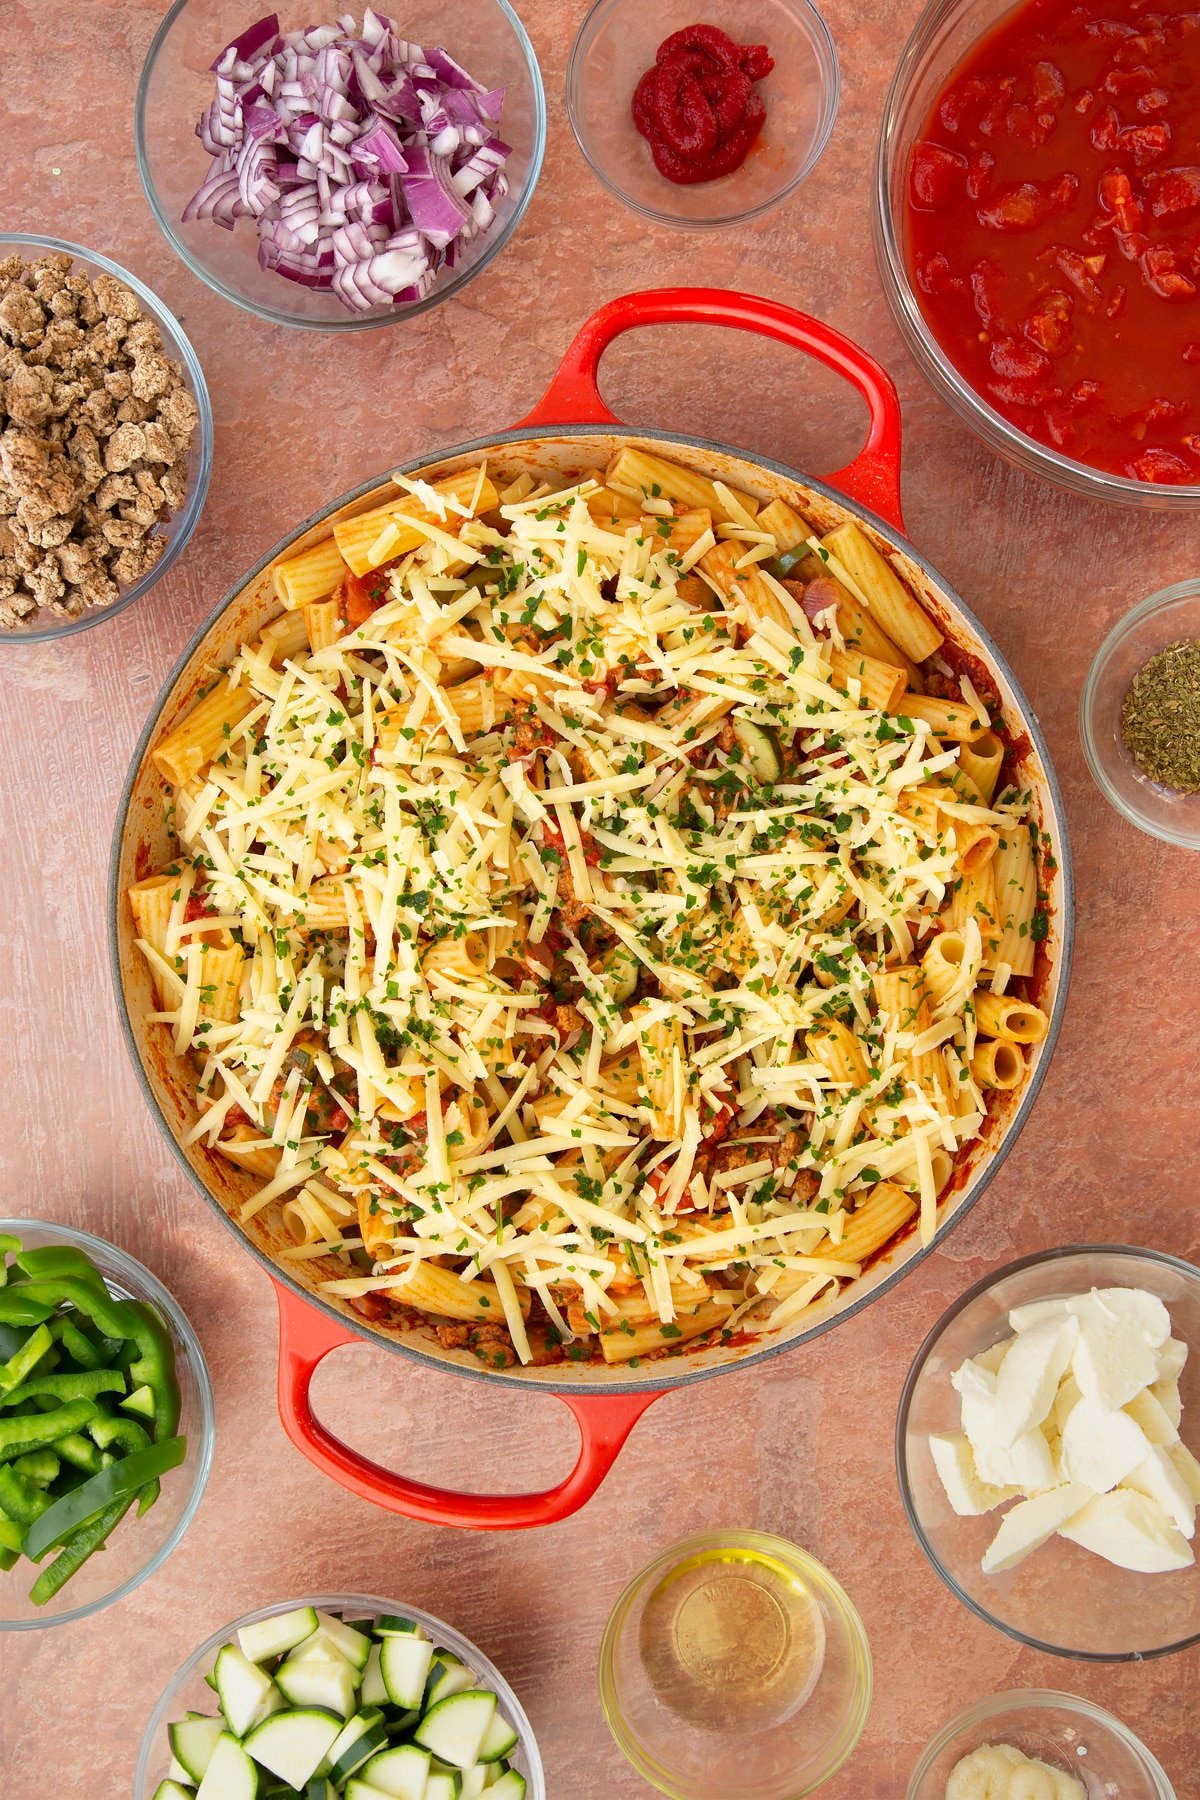 A casserole dish containing a bolognese sauce mixed with cooked pasta and torn mozzarella, topped with grated cheese and chopped parsley. Ingredients to make bolognese al forno surround the dish.